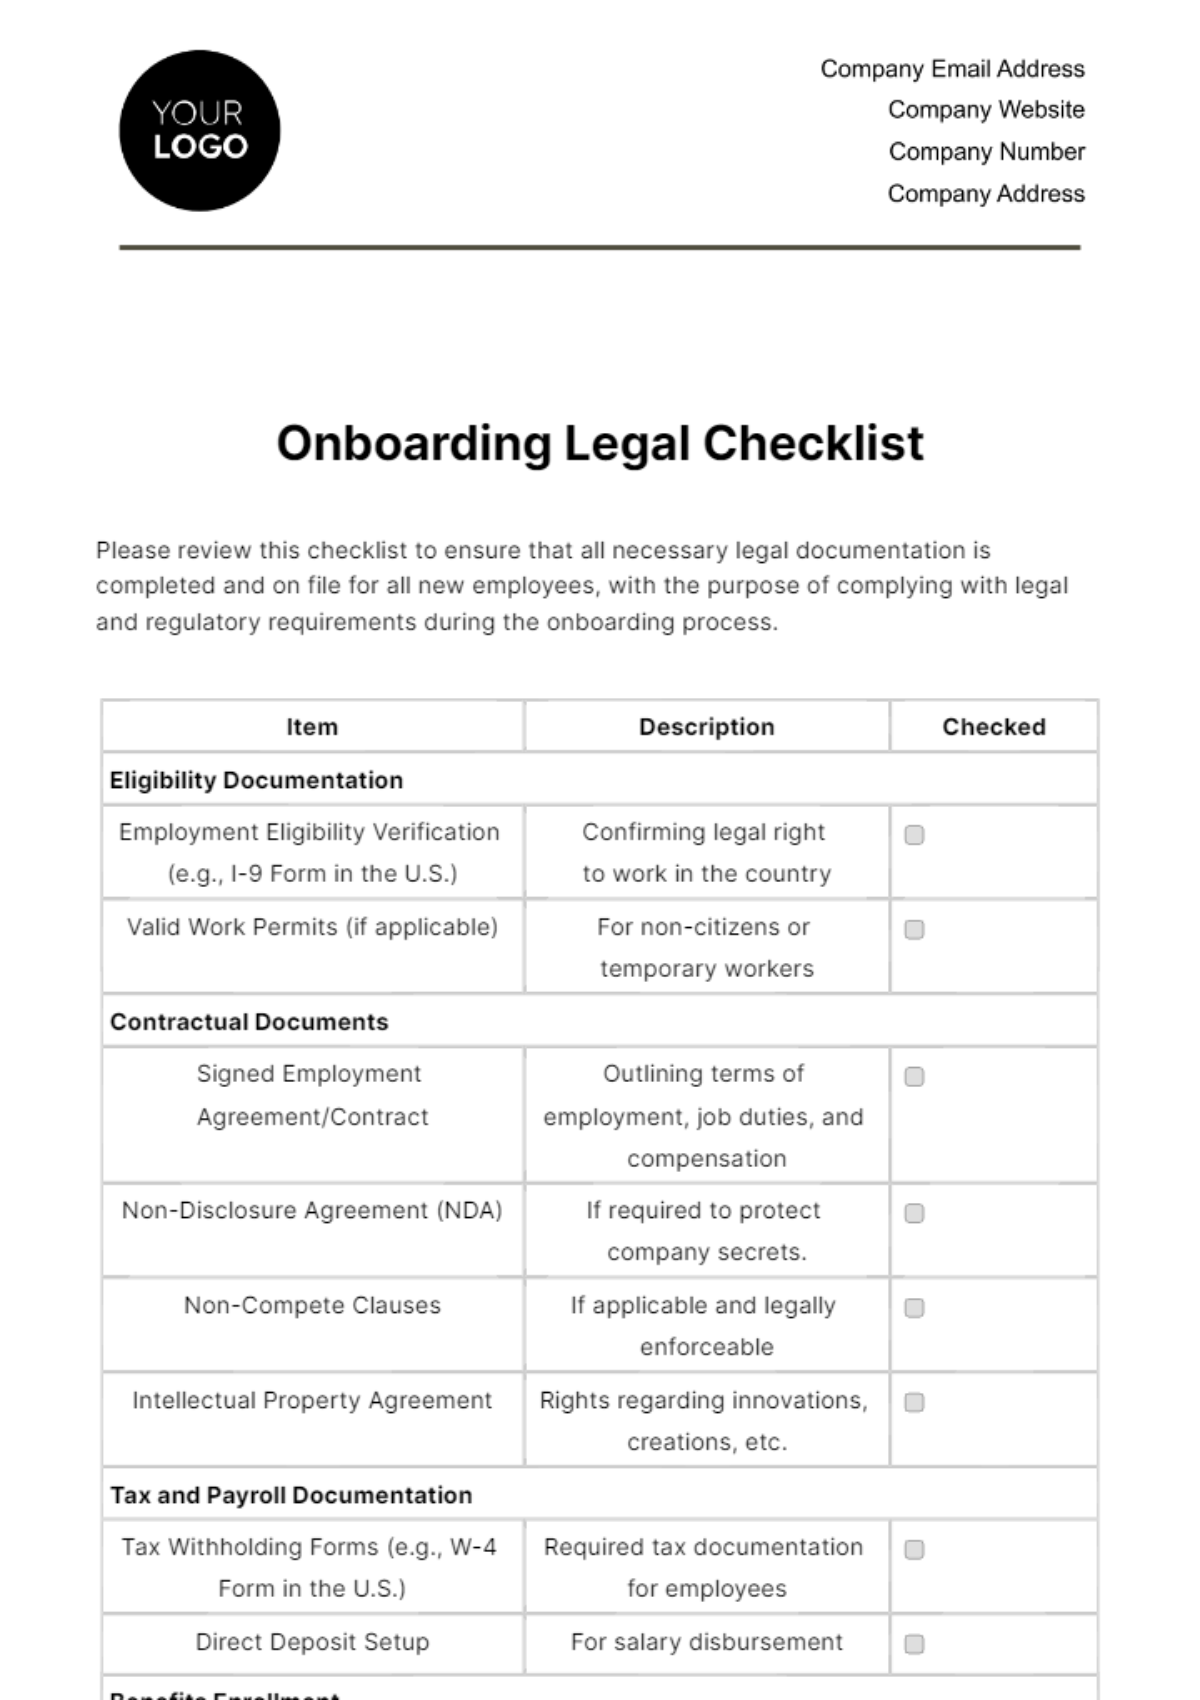 Free Onboarding Legal Checklist HR Template